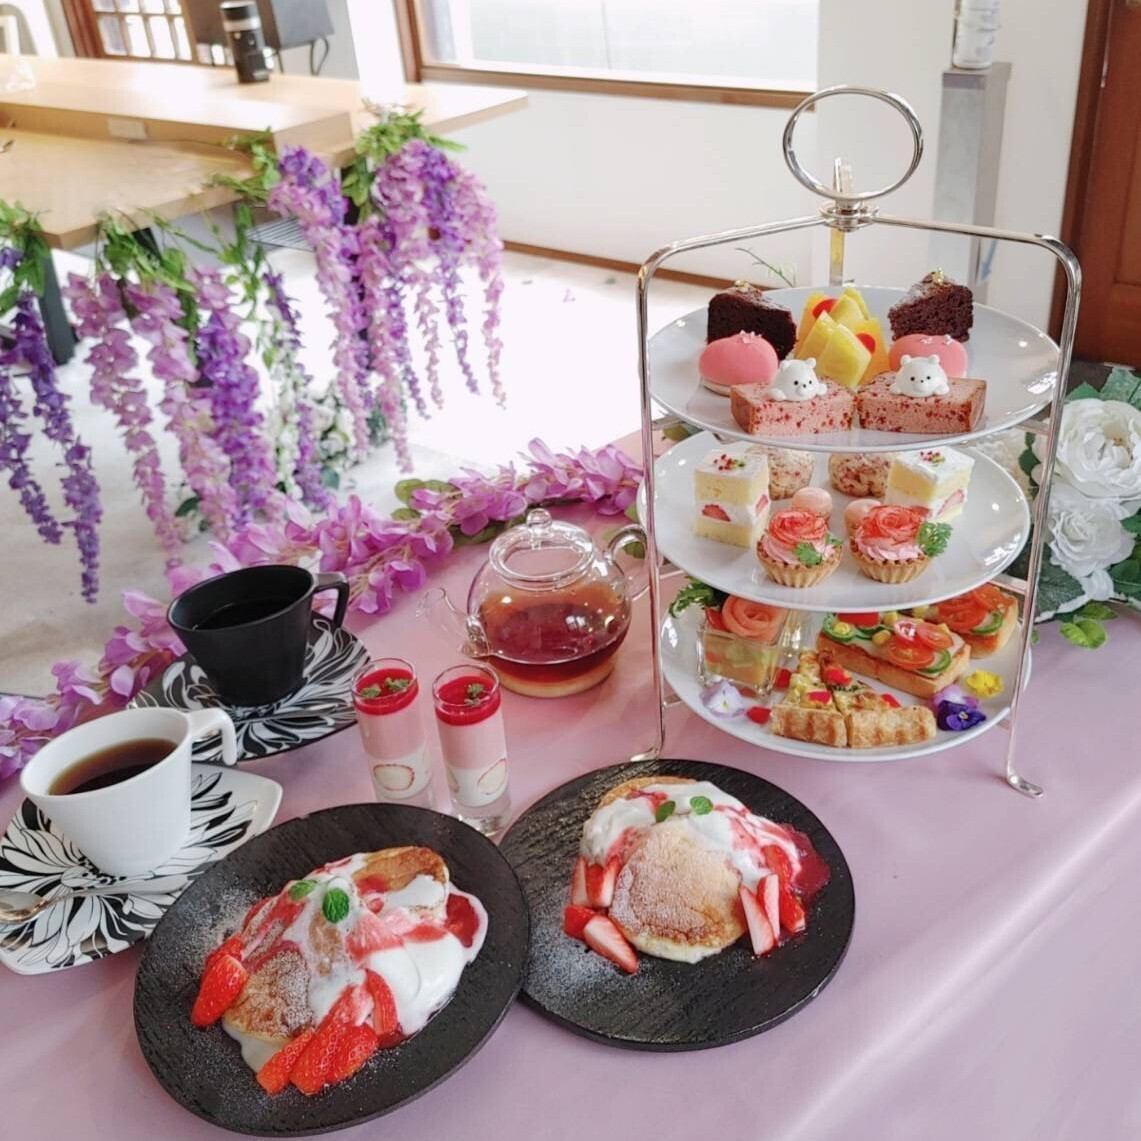 A cute and stylish interior♪ Seasonal afternoon teas are also popular!